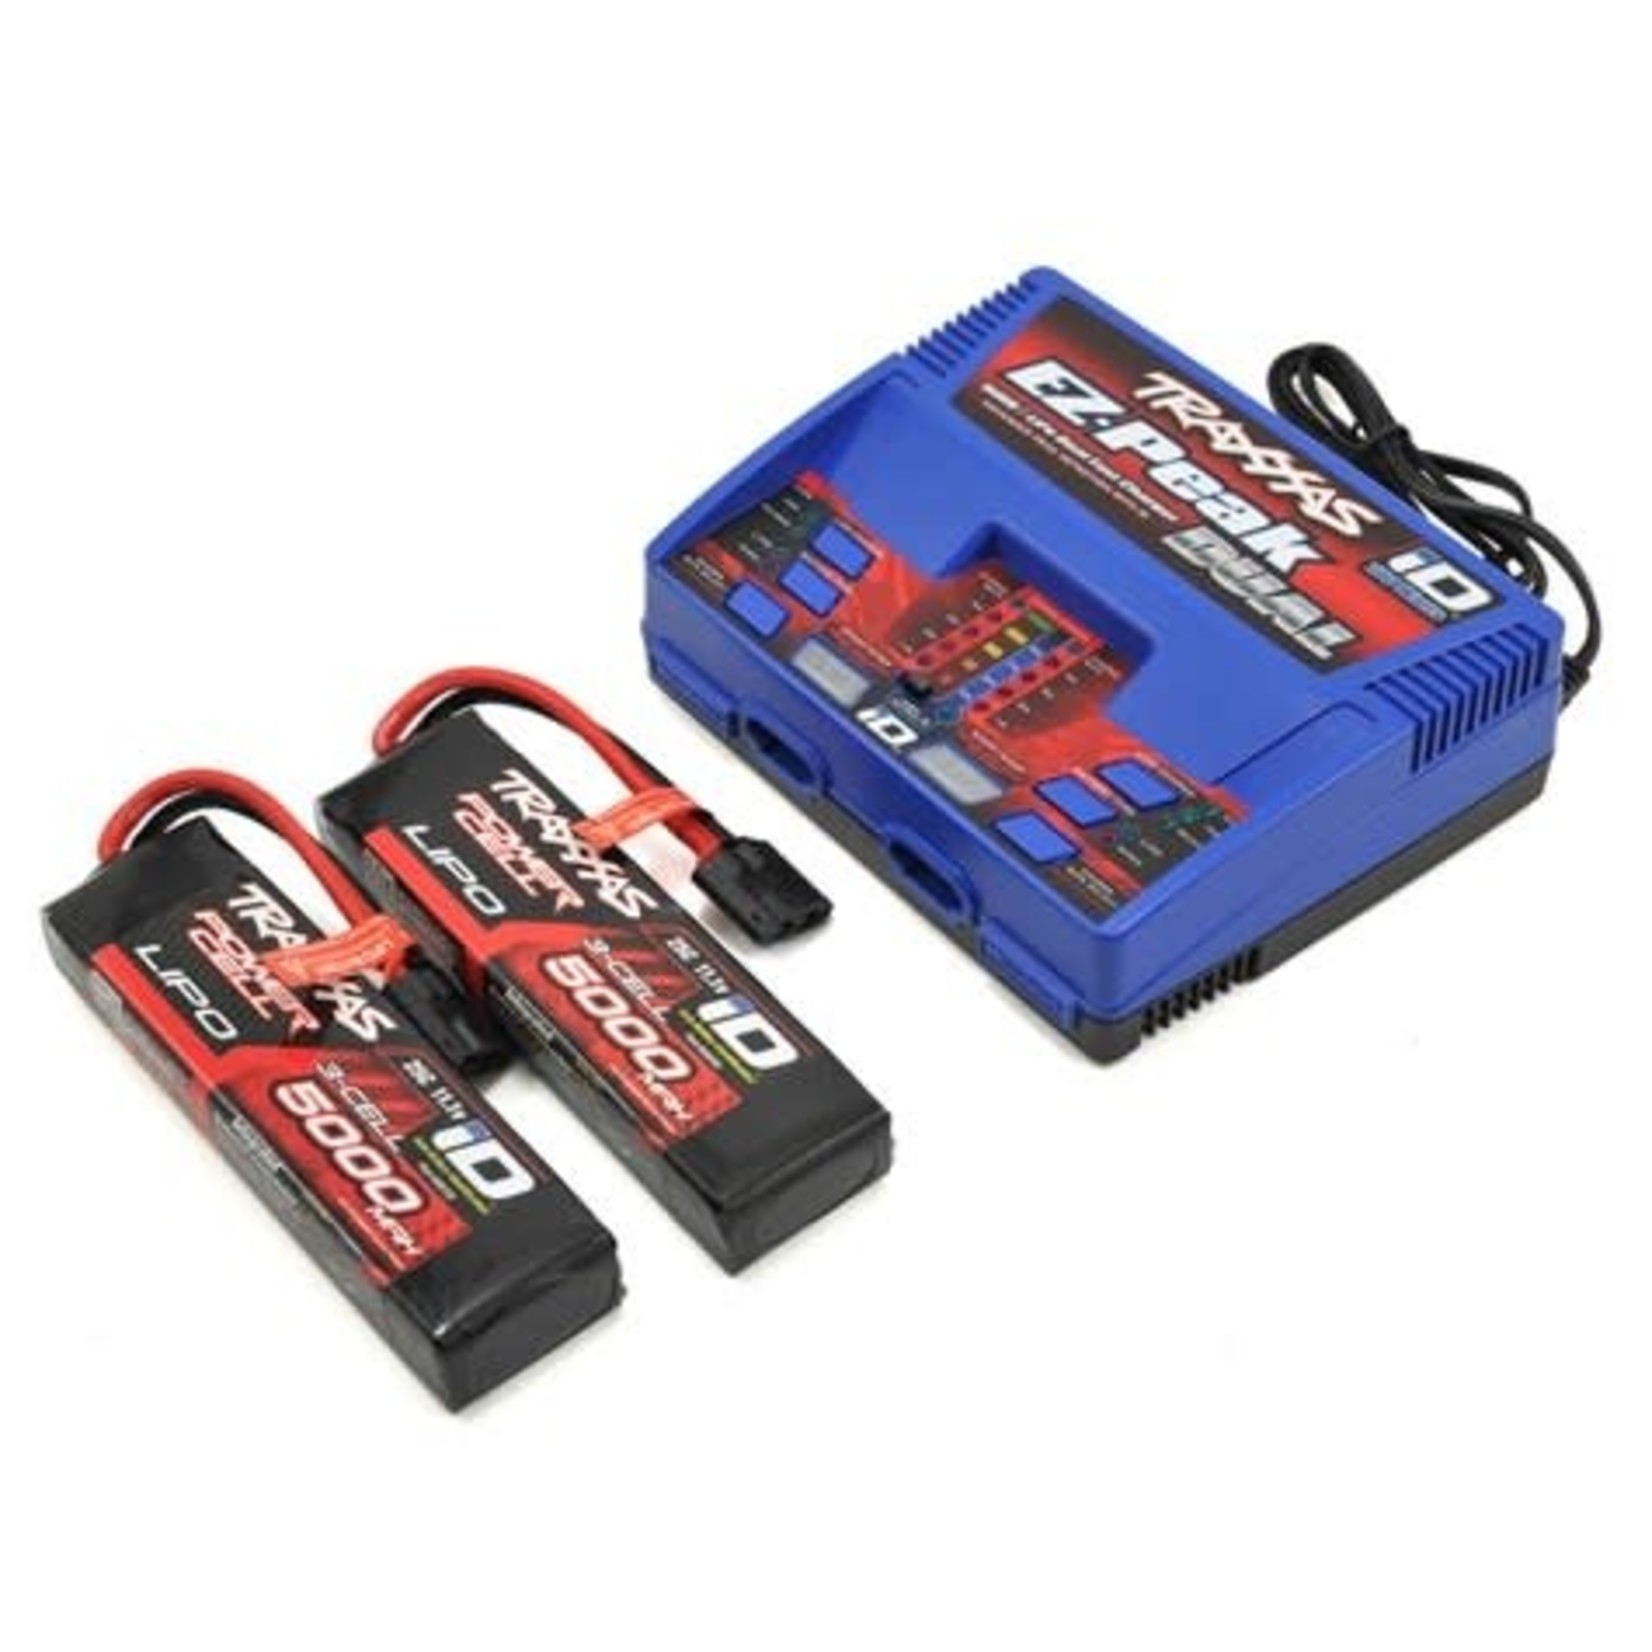 Traxxas Traxxas EZ-Peak 3S "Completer Pack" Dual Multi-Chemistry Battery Charger  w/Two Power Cell Batteries (5000mAh) #2990